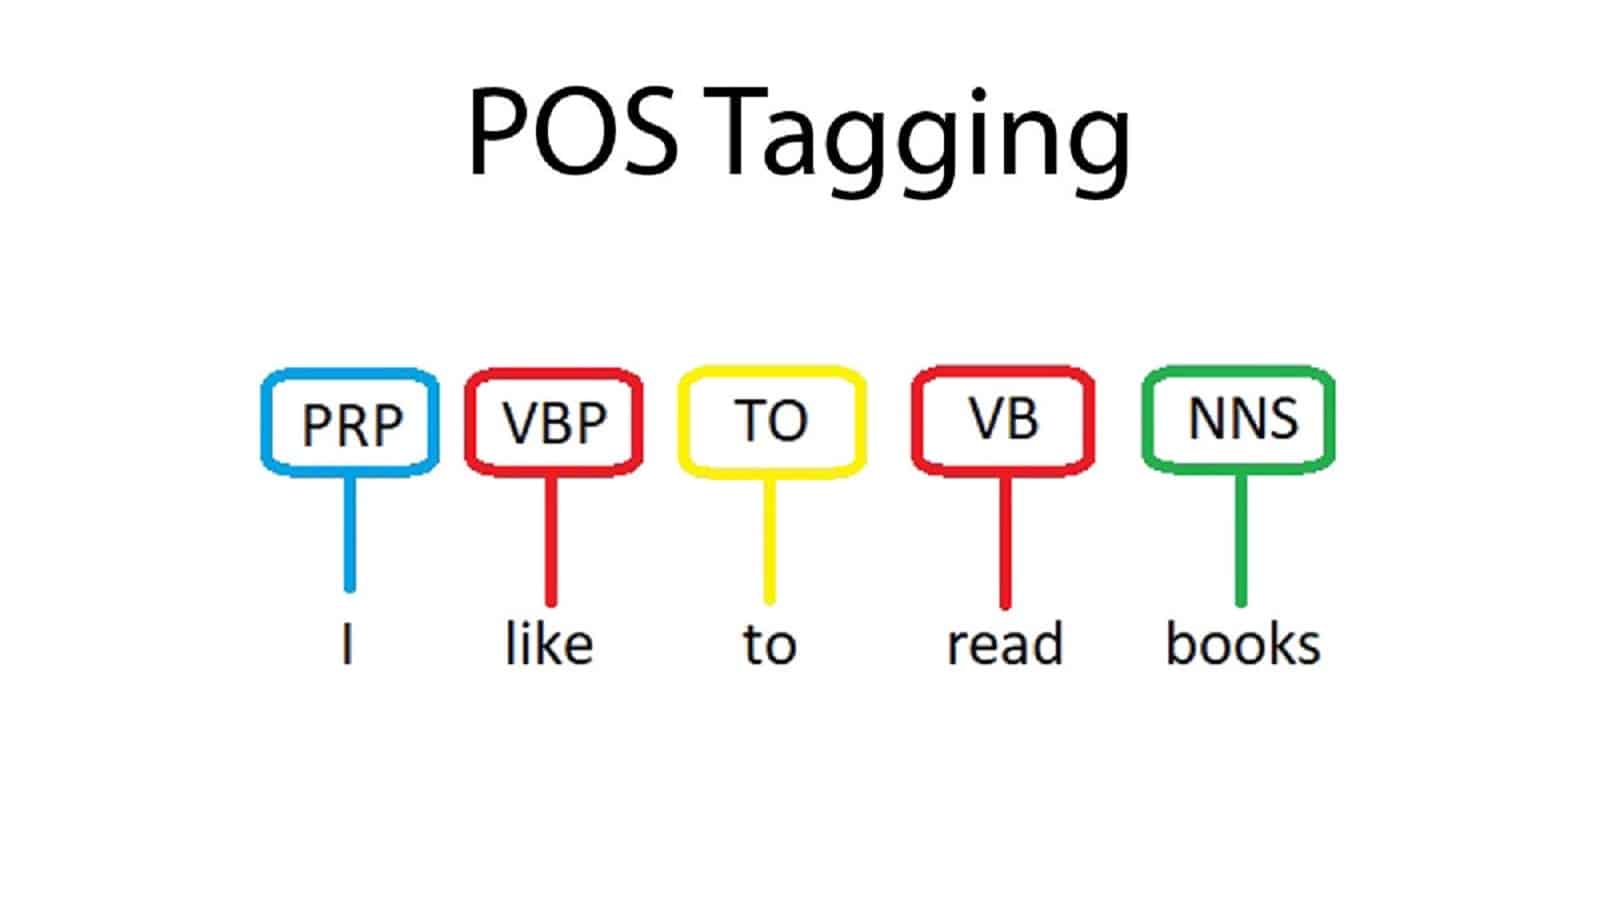 Part-of-Speech (POS) tagging